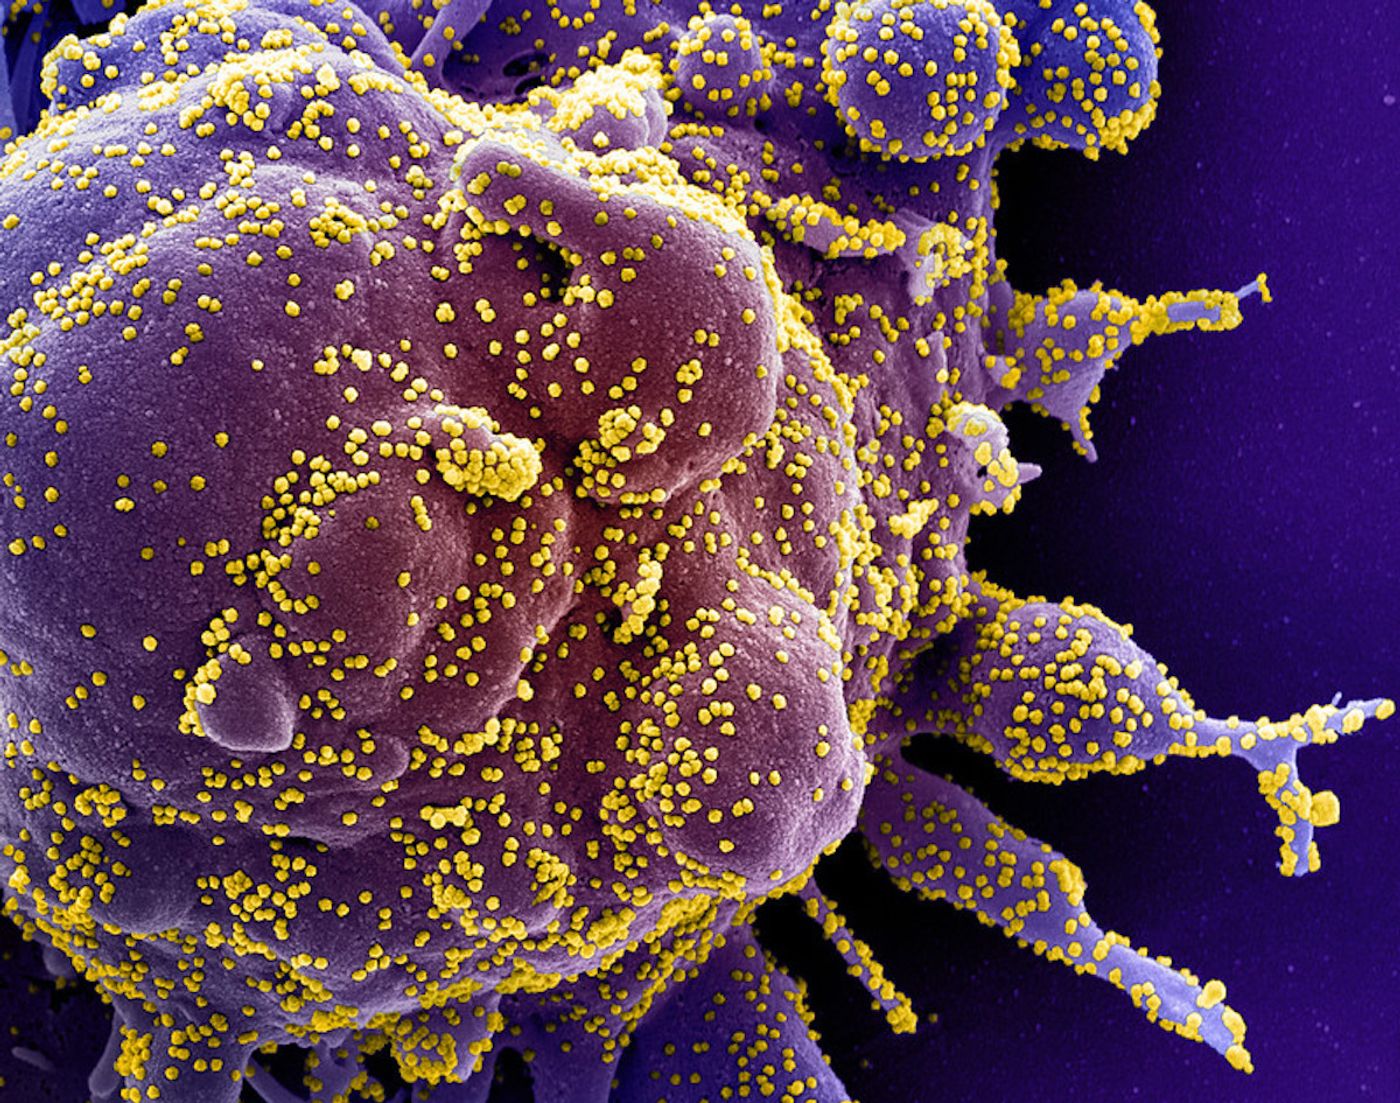 Colorized scanning electron micrograph of an apoptotic cell (purple) heavily infected with SARS-COV-2 virus particles (yellow), isolated from a patient sample. Image captured at the NIAID Integrated Research Facility (IRF) in Fort Detrick, Maryland. / Credit: NIAID